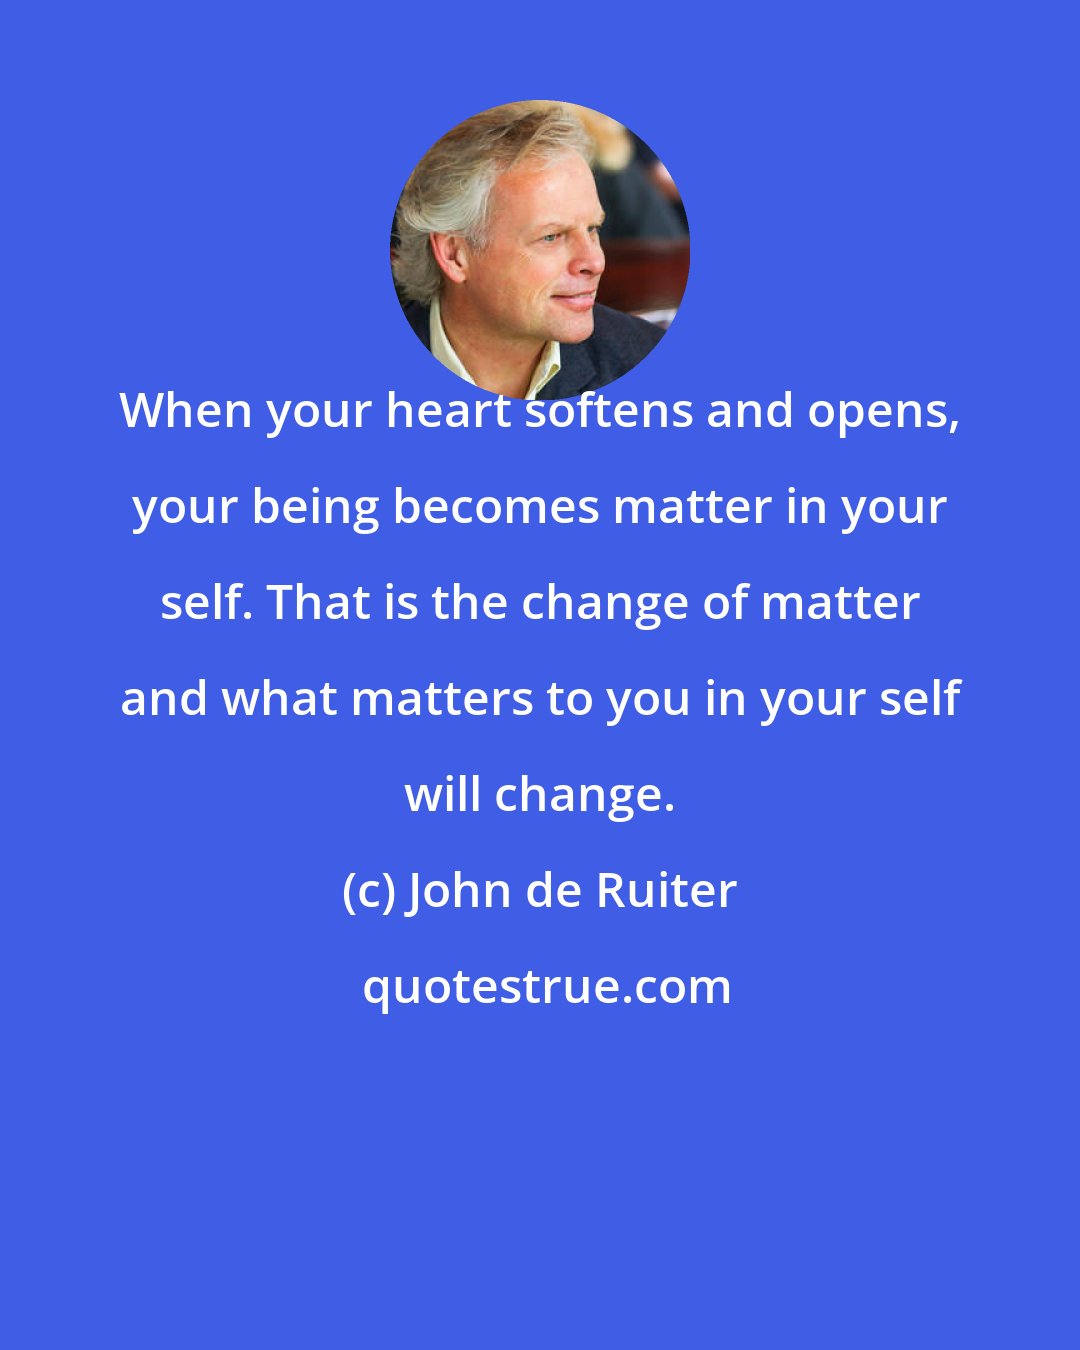 John de Ruiter: When your heart softens and opens, your being becomes matter in your self. That is the change of matter and what matters to you in your self will change.